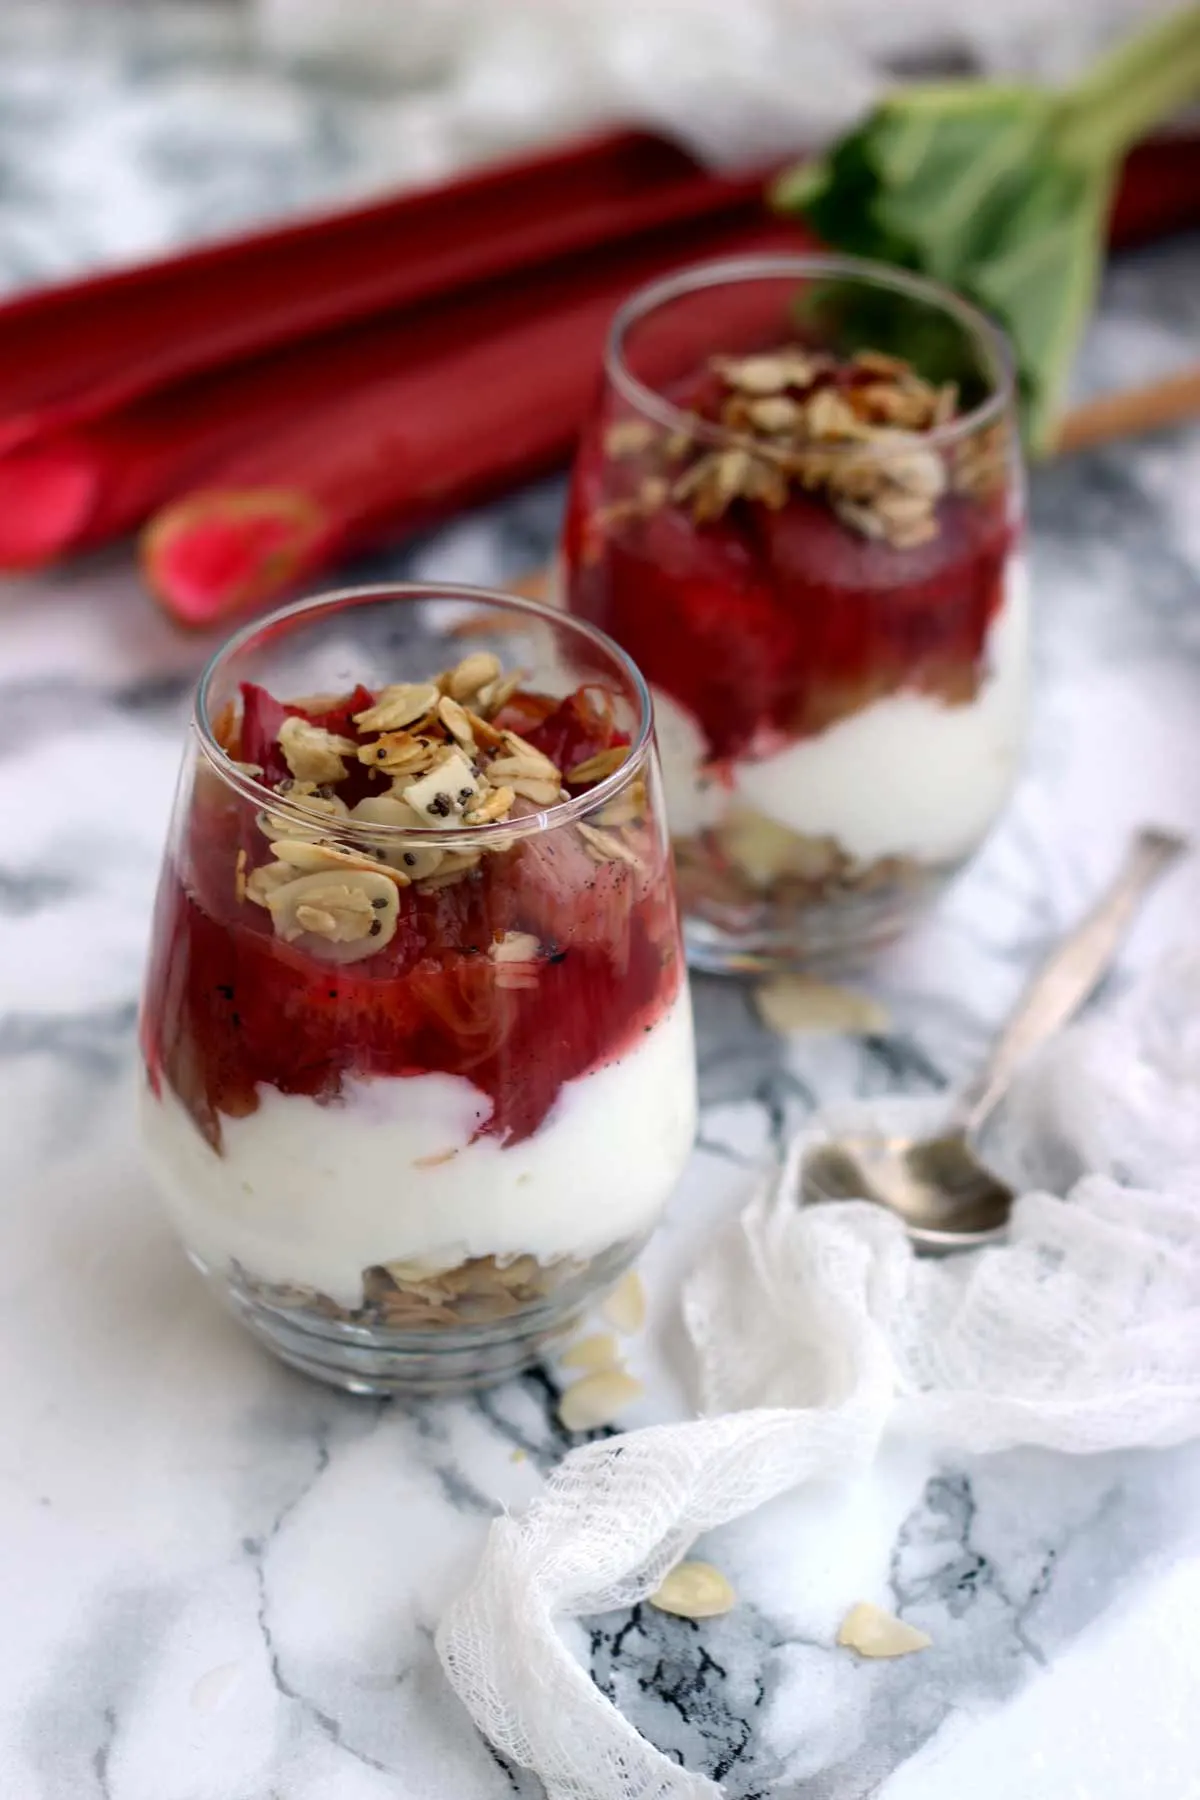 Easy Healthy Cheesecake in a Jar